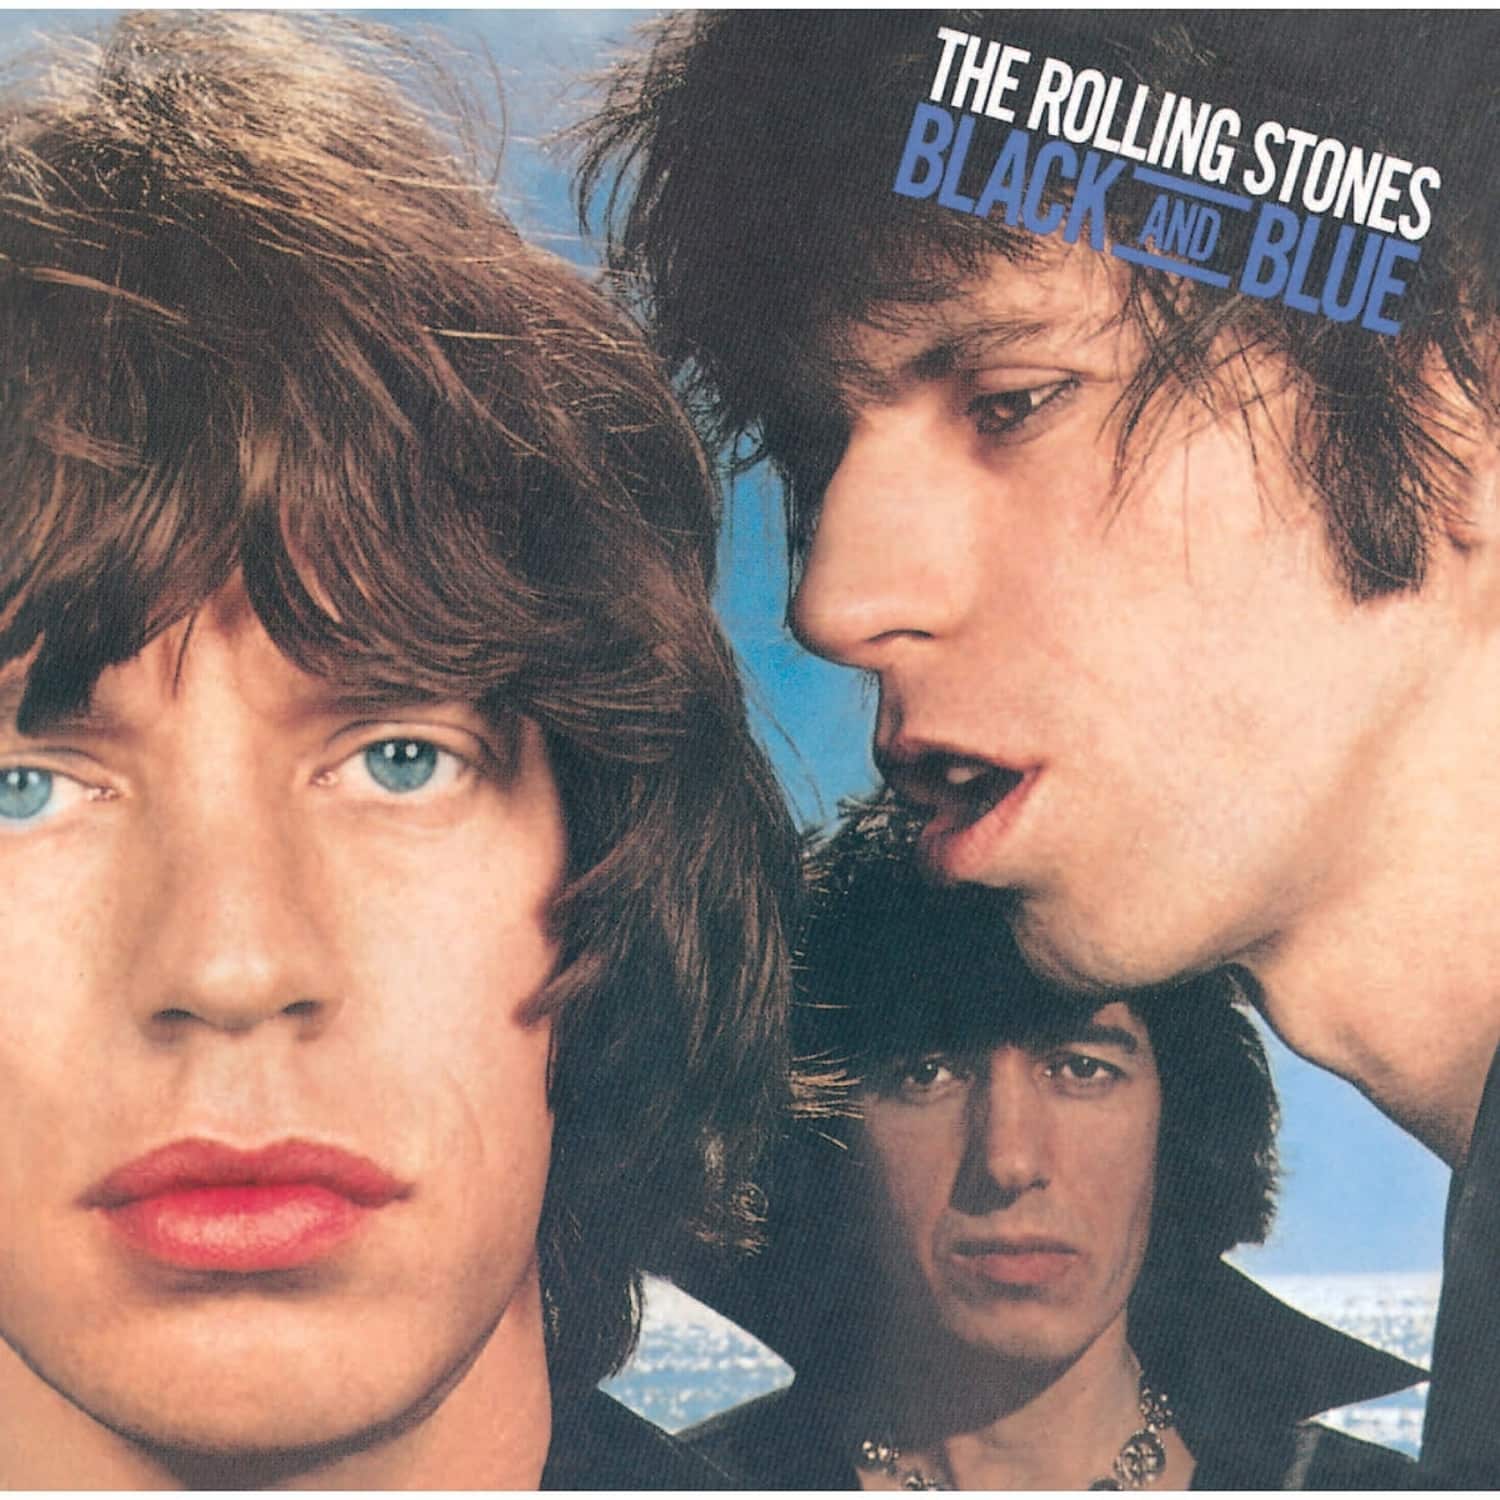 The Rolling Stones - BLACK AND BLUE 